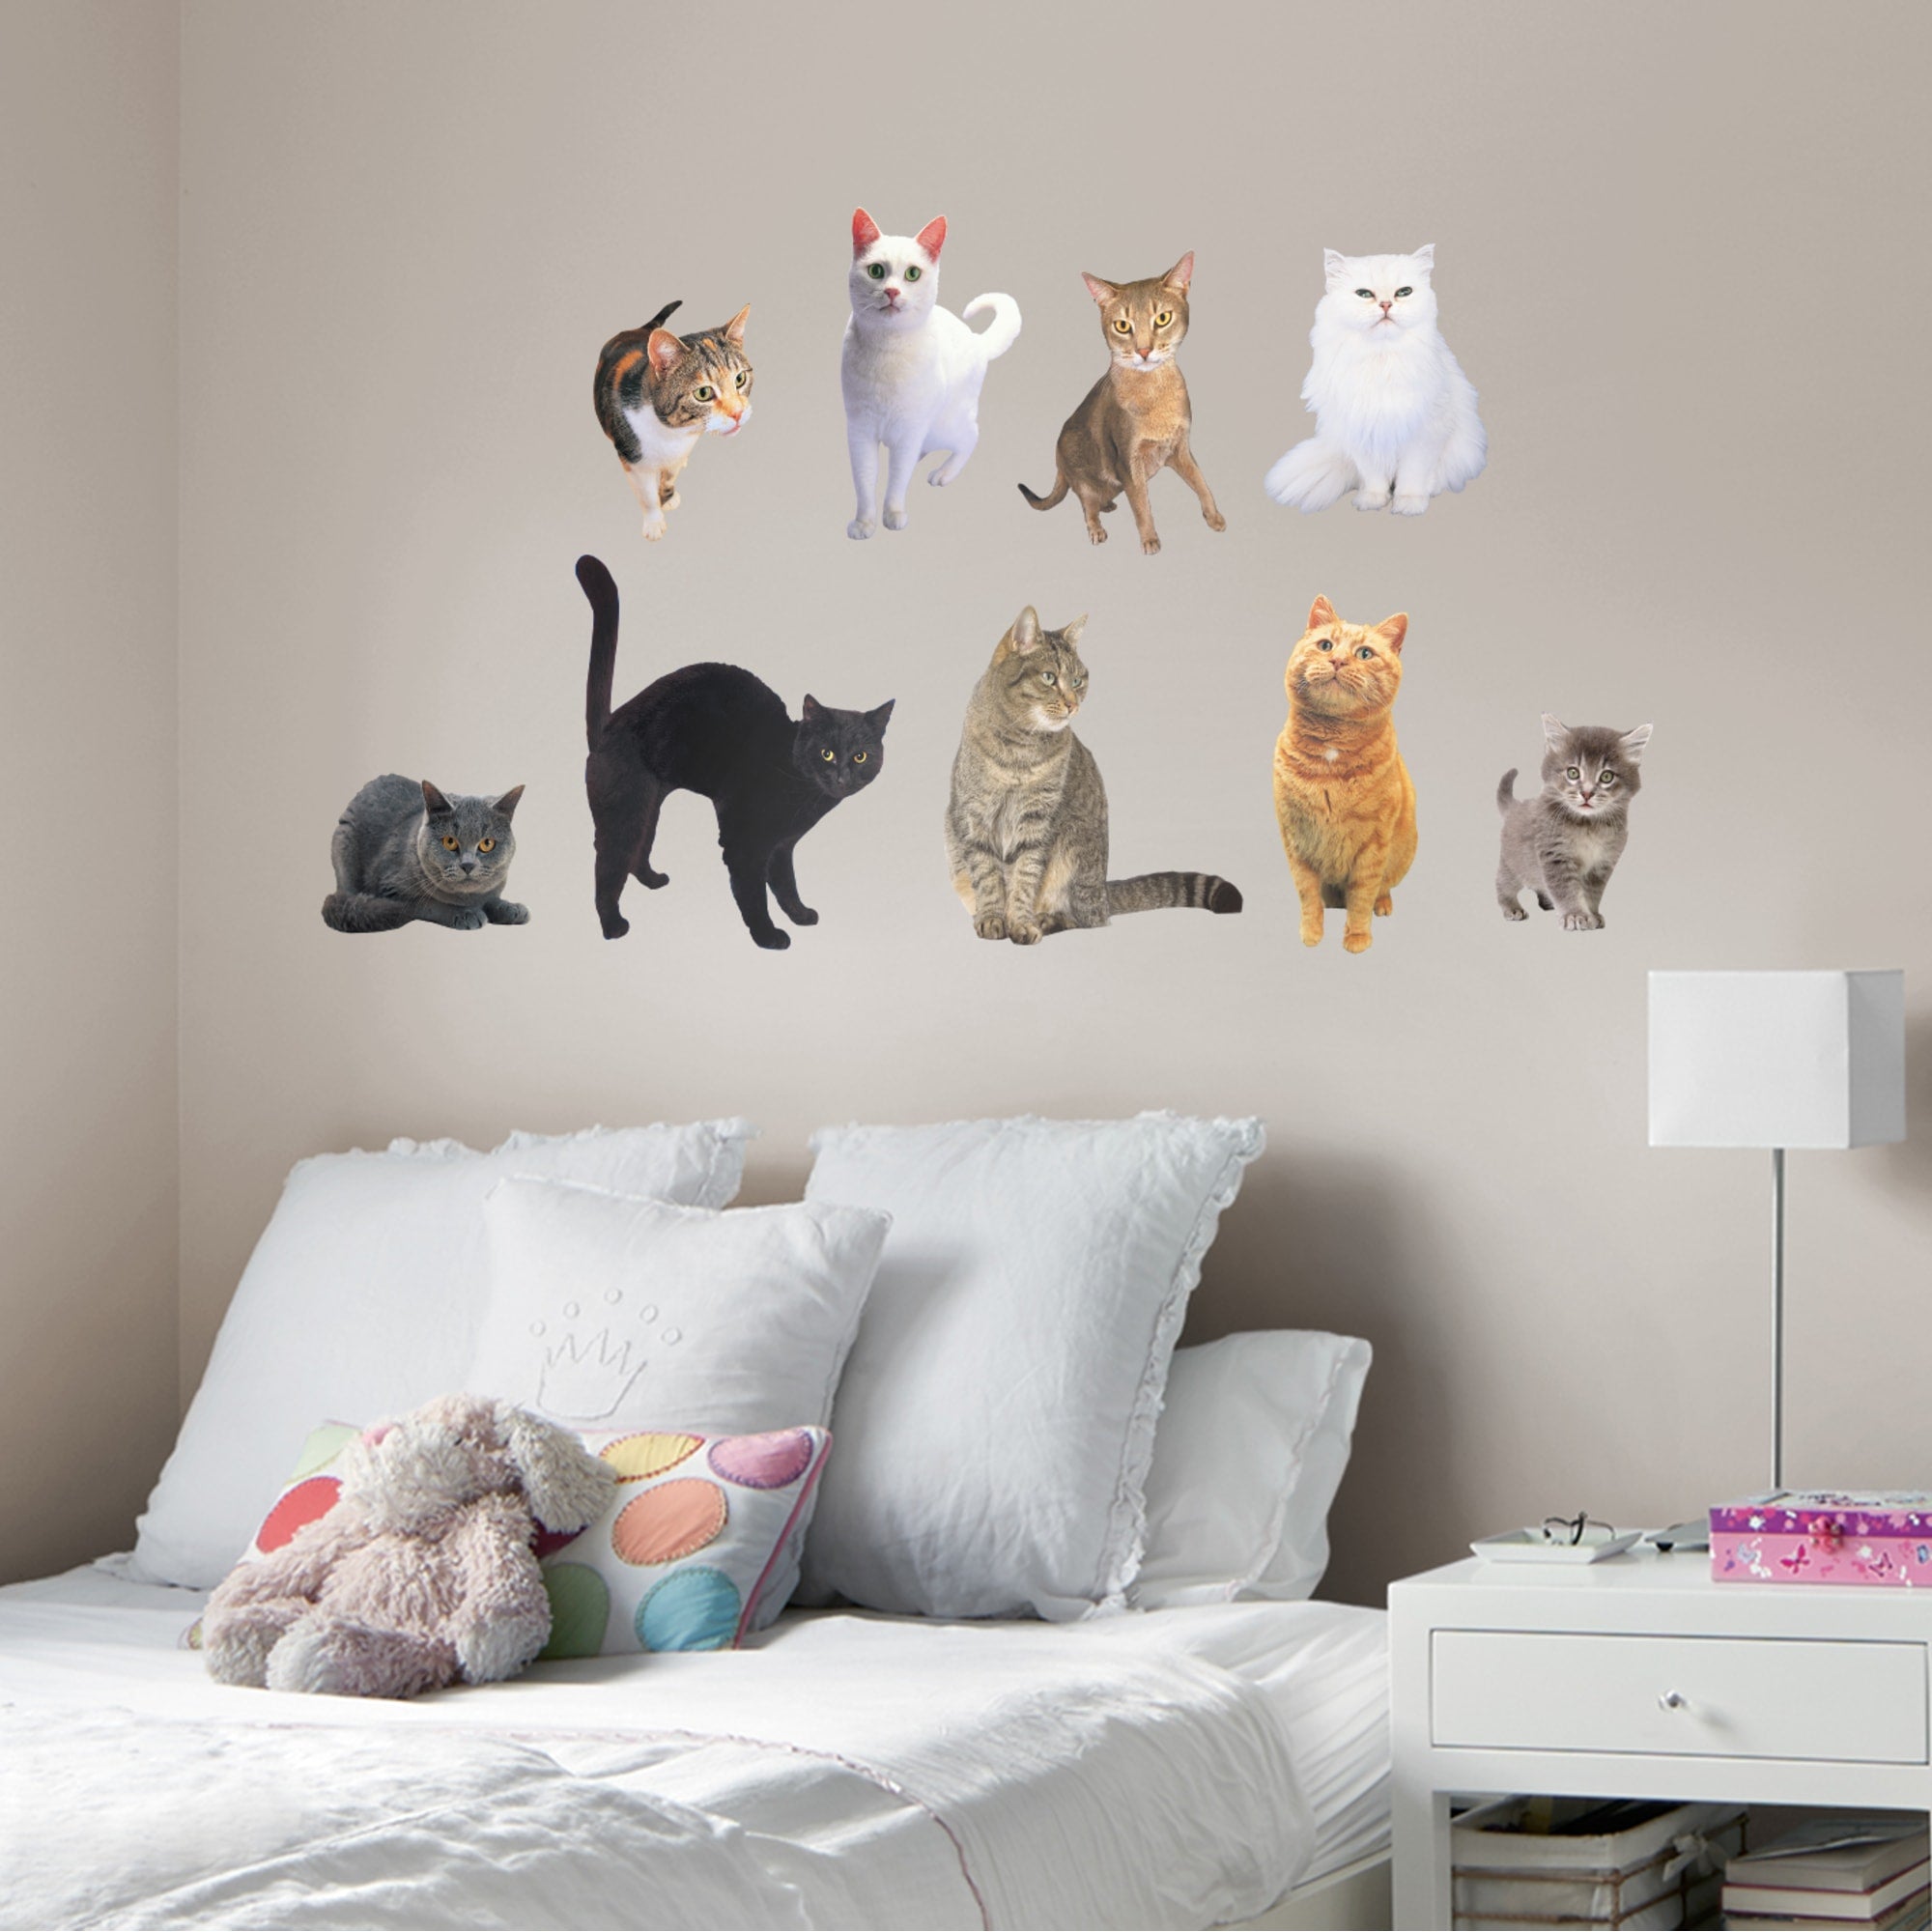 Cats Collection - Removable Vinyl Decals 26.0"W x 39.5"H by Fathead